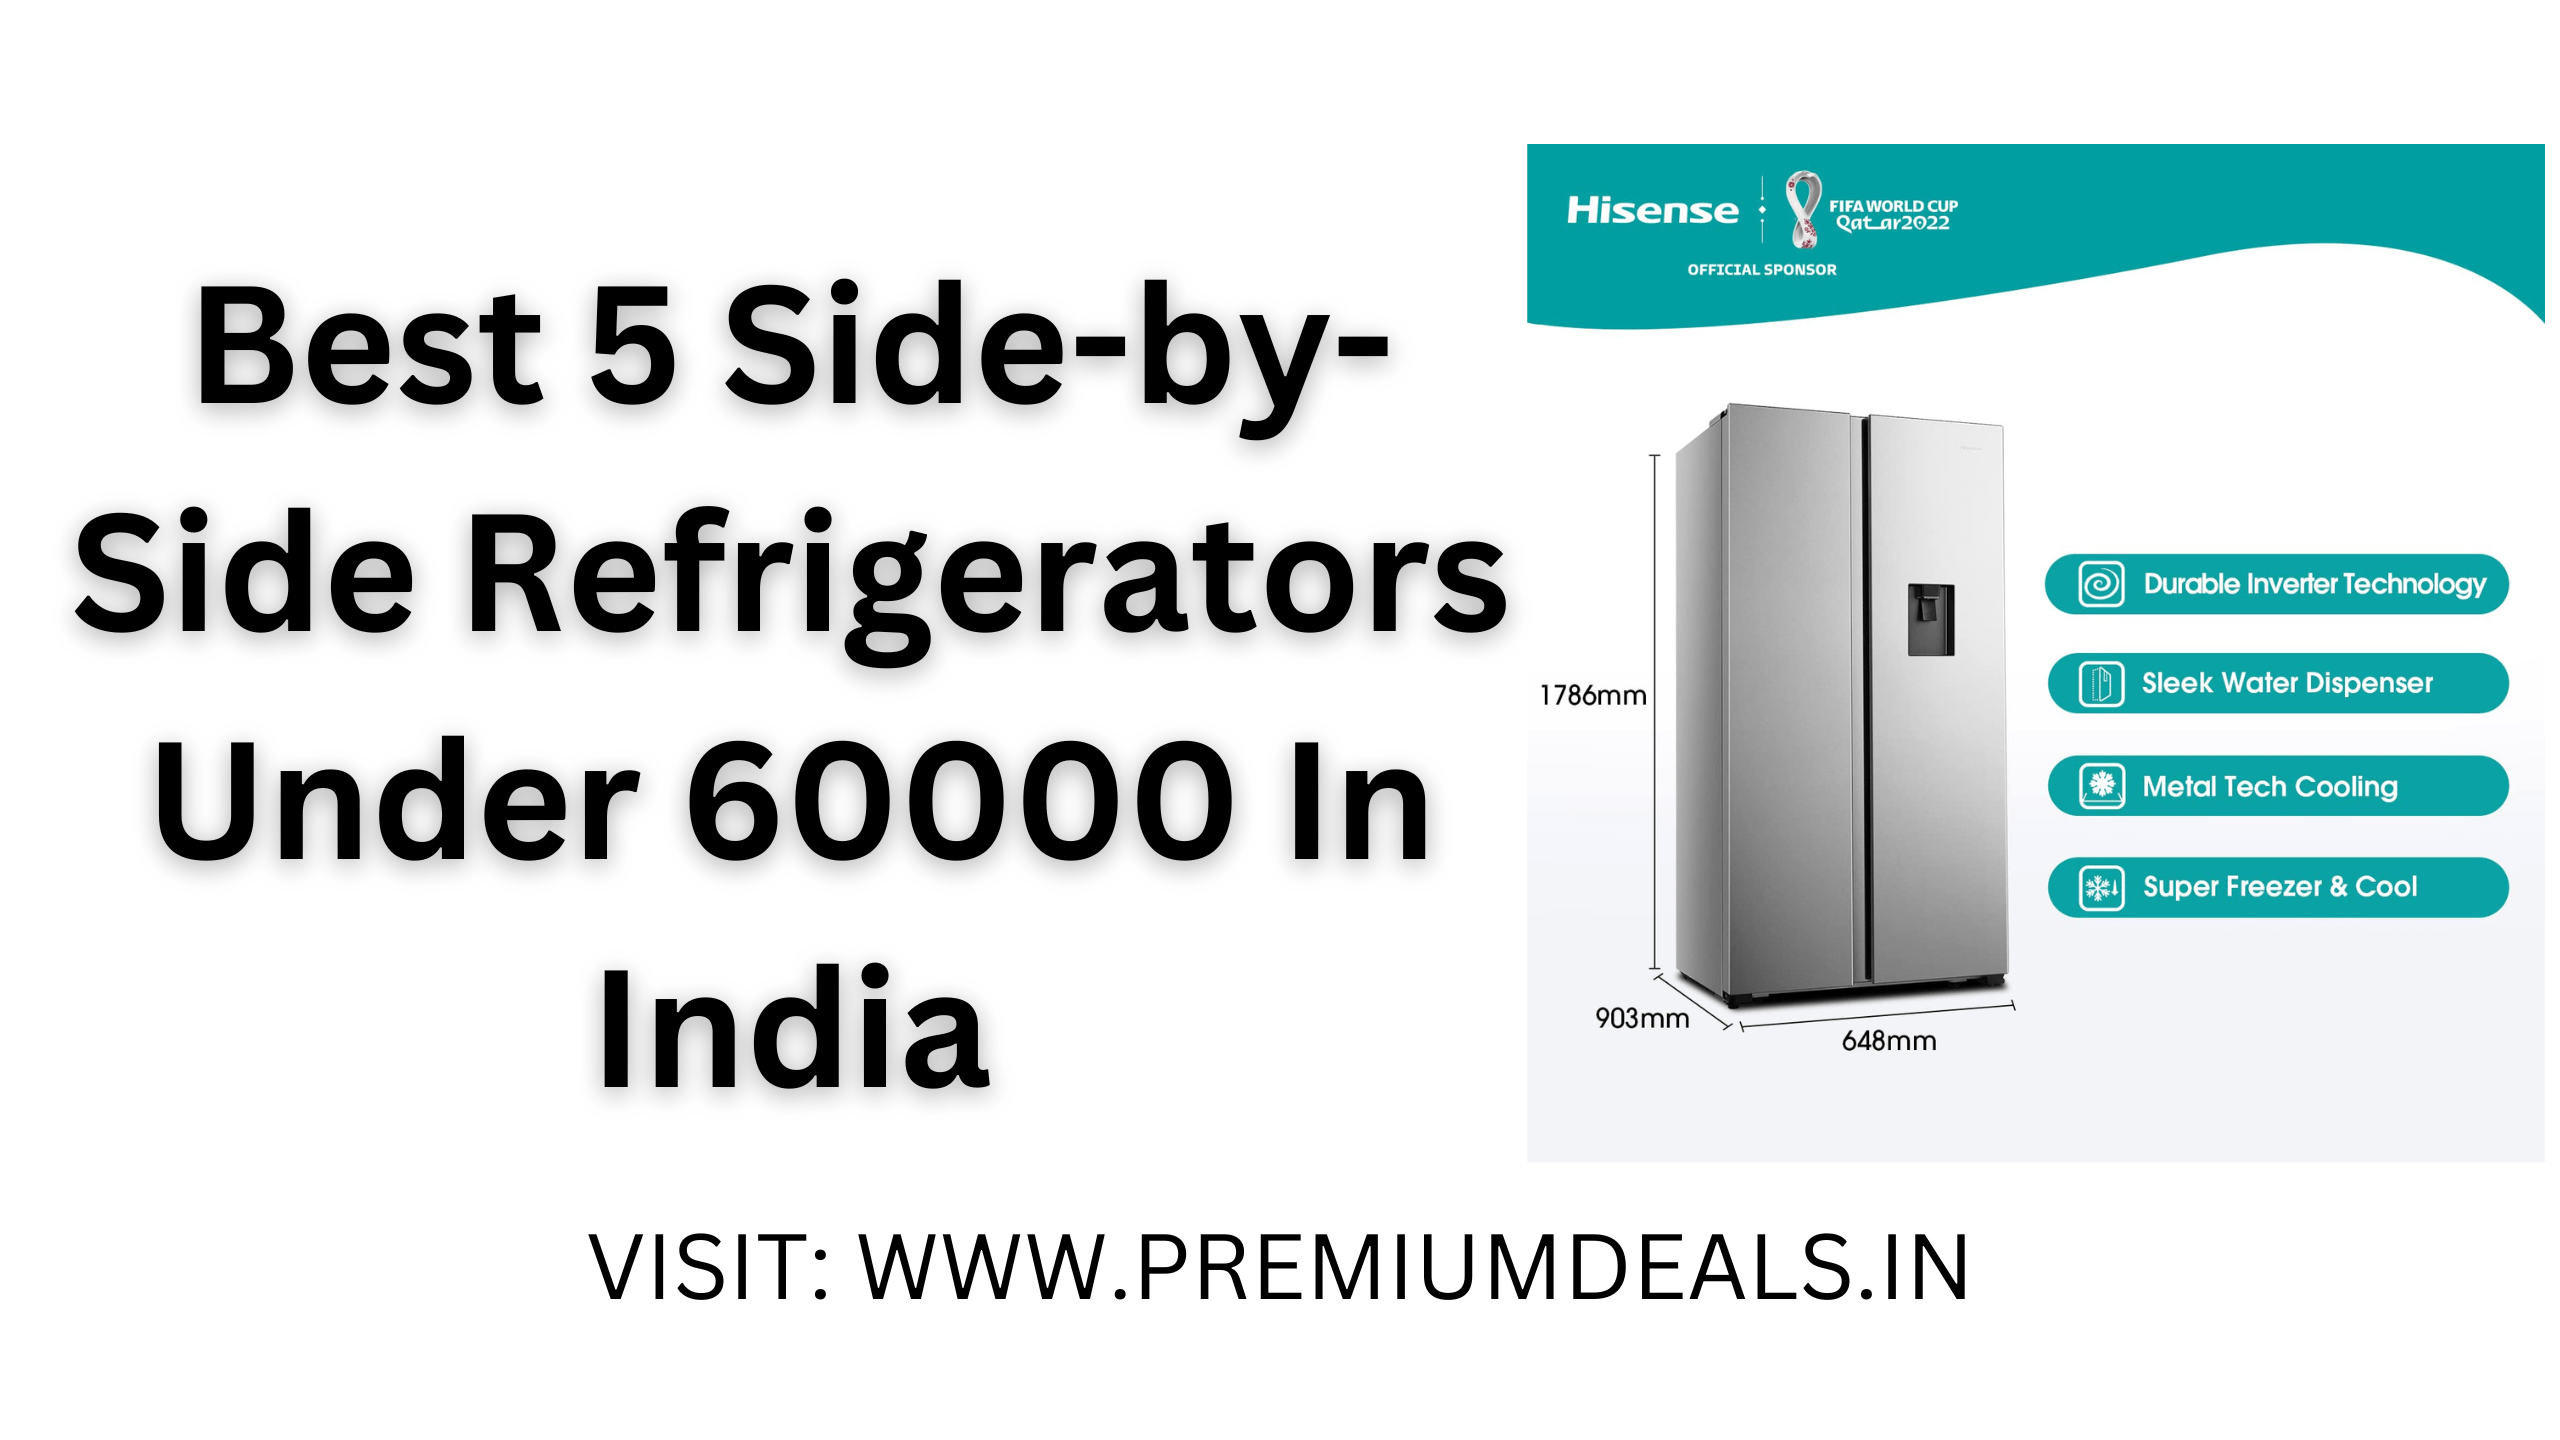 Best 5 Side-by-Side Refrigerators Under 60000 In India